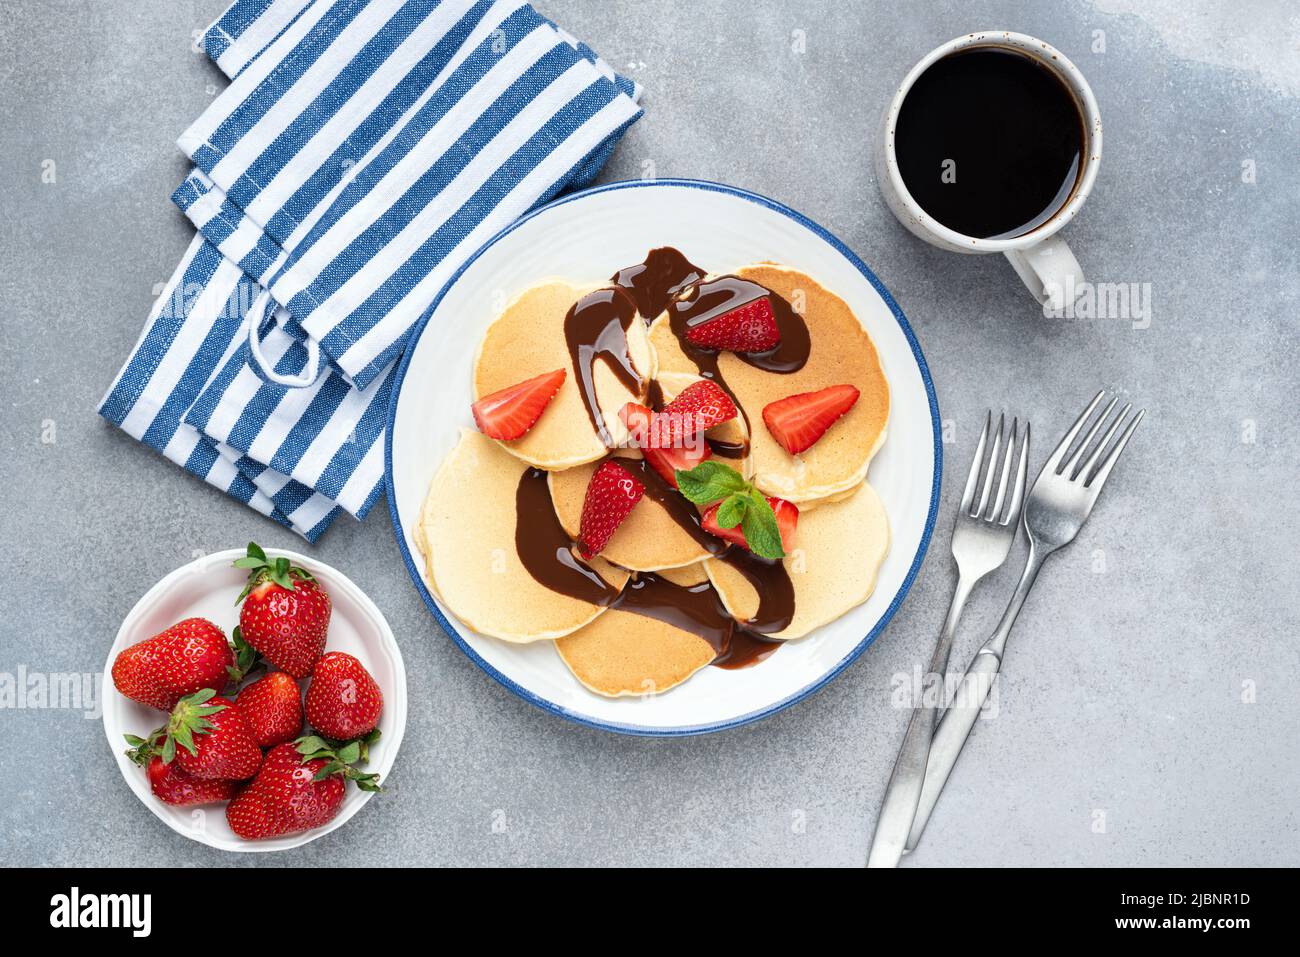 Crepes or pancakes with strawberries and chocolate on plate served with cup of black coffee, grey concrete table background. Top view Stock Photo